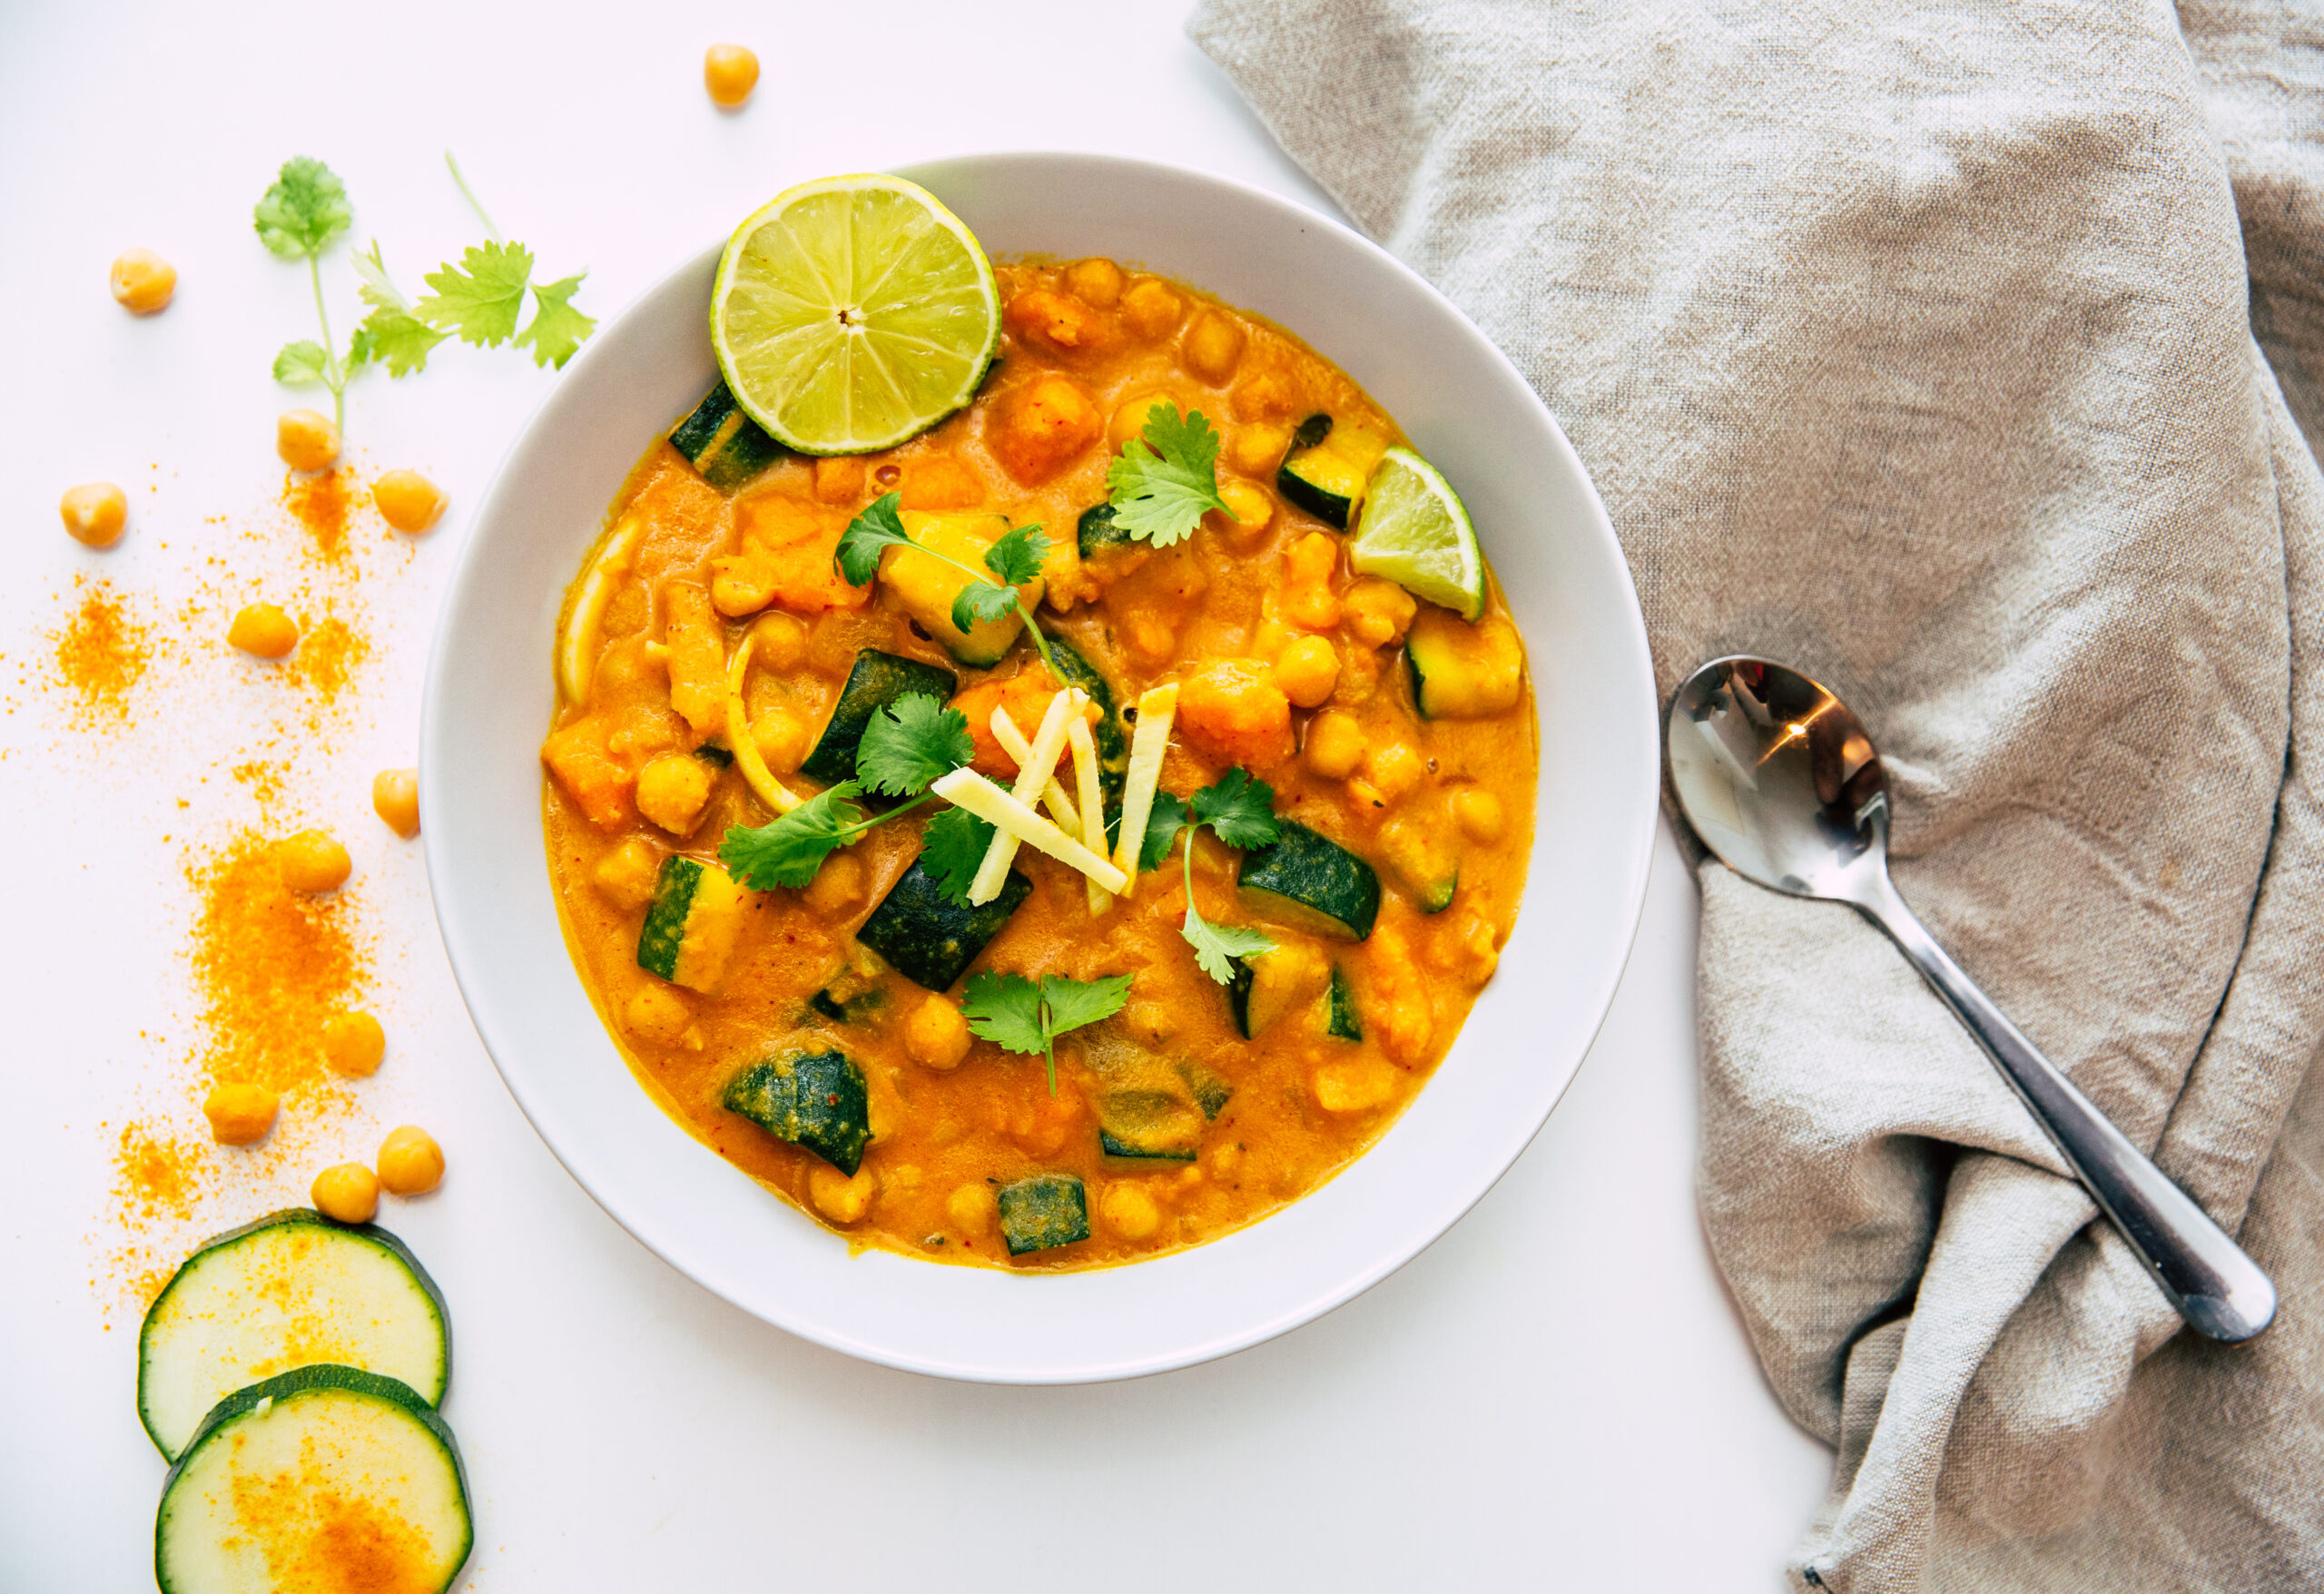 South Asian Chickpea Curry